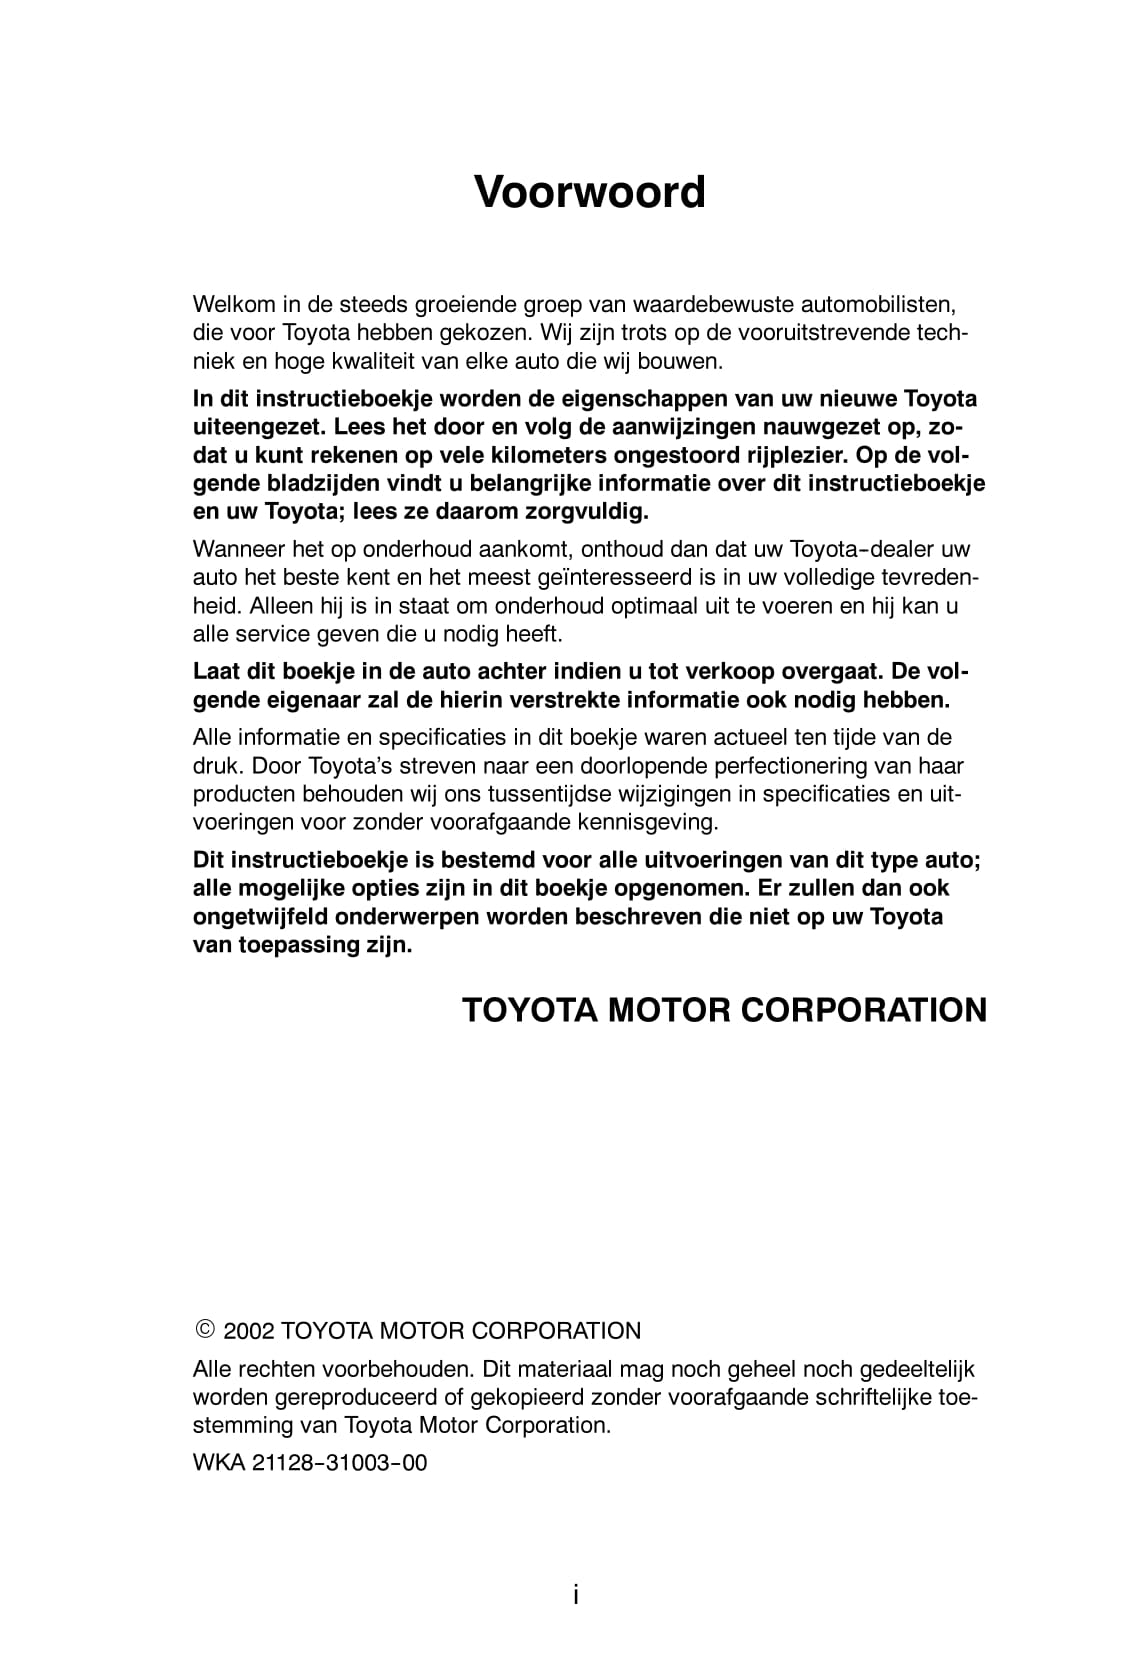 2002-2004 Toyota Camry Owner's Manual | Dutch